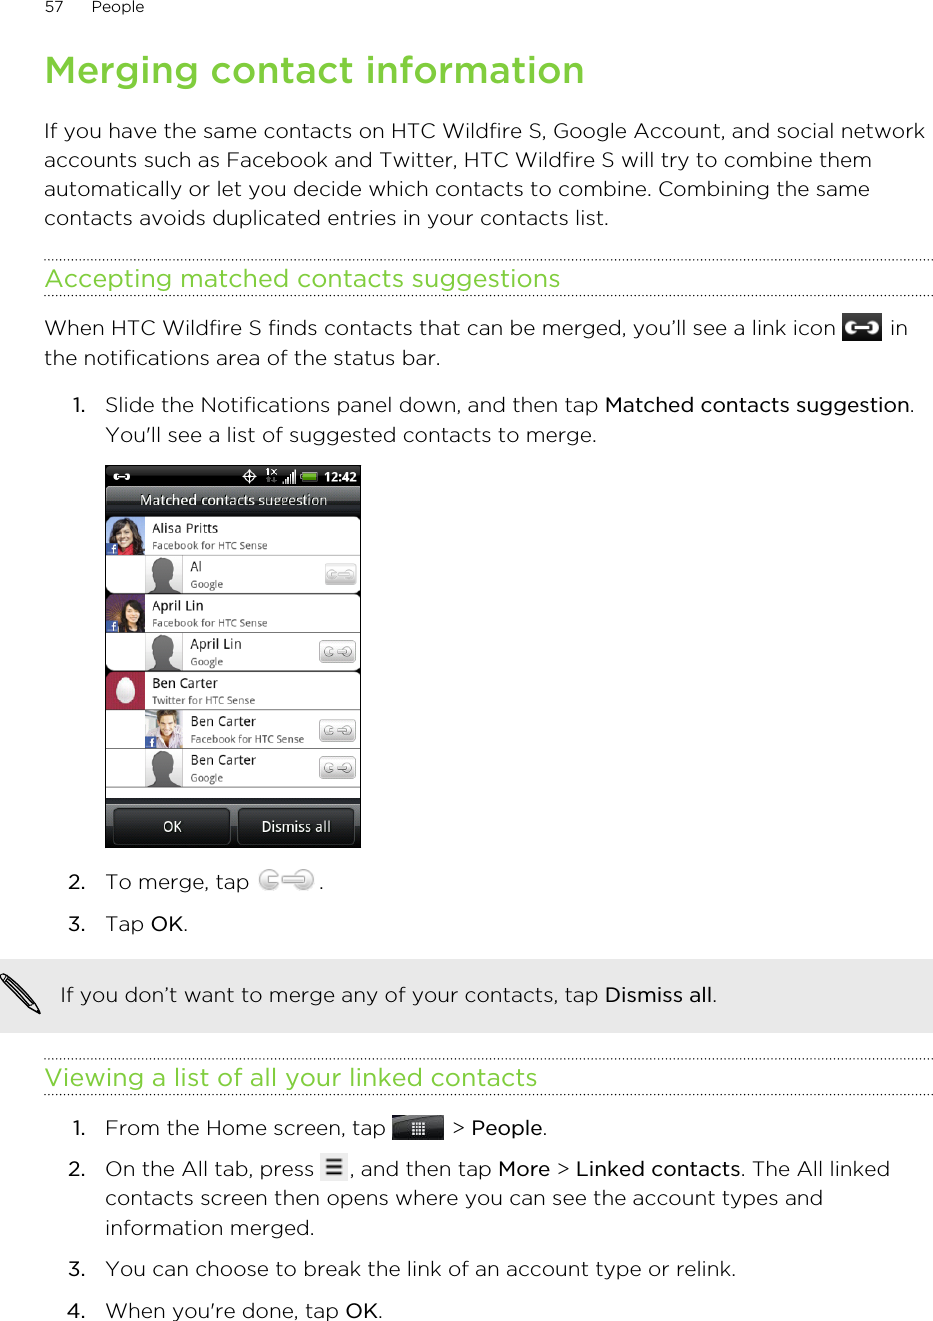 Merging contact informationIf you have the same contacts on HTC Wildfire S, Google Account, and social networkaccounts such as Facebook and Twitter, HTC Wildfire S will try to combine themautomatically or let you decide which contacts to combine. Combining the samecontacts avoids duplicated entries in your contacts list.Accepting matched contacts suggestionsWhen HTC Wildfire S finds contacts that can be merged, you’ll see a link icon   inthe notifications area of the status bar.1. Slide the Notifications panel down, and then tap Matched contacts suggestion.You&apos;ll see a list of suggested contacts to merge.2. To merge, tap  .3. Tap OK.If you don’t want to merge any of your contacts, tap Dismiss all.Viewing a list of all your linked contacts1. From the Home screen, tap   &gt; People.2. On the All tab, press  , and then tap More &gt; Linked contacts. The All linkedcontacts screen then opens where you can see the account types andinformation merged.3. You can choose to break the link of an account type or relink.4. When you&apos;re done, tap OK.57 People